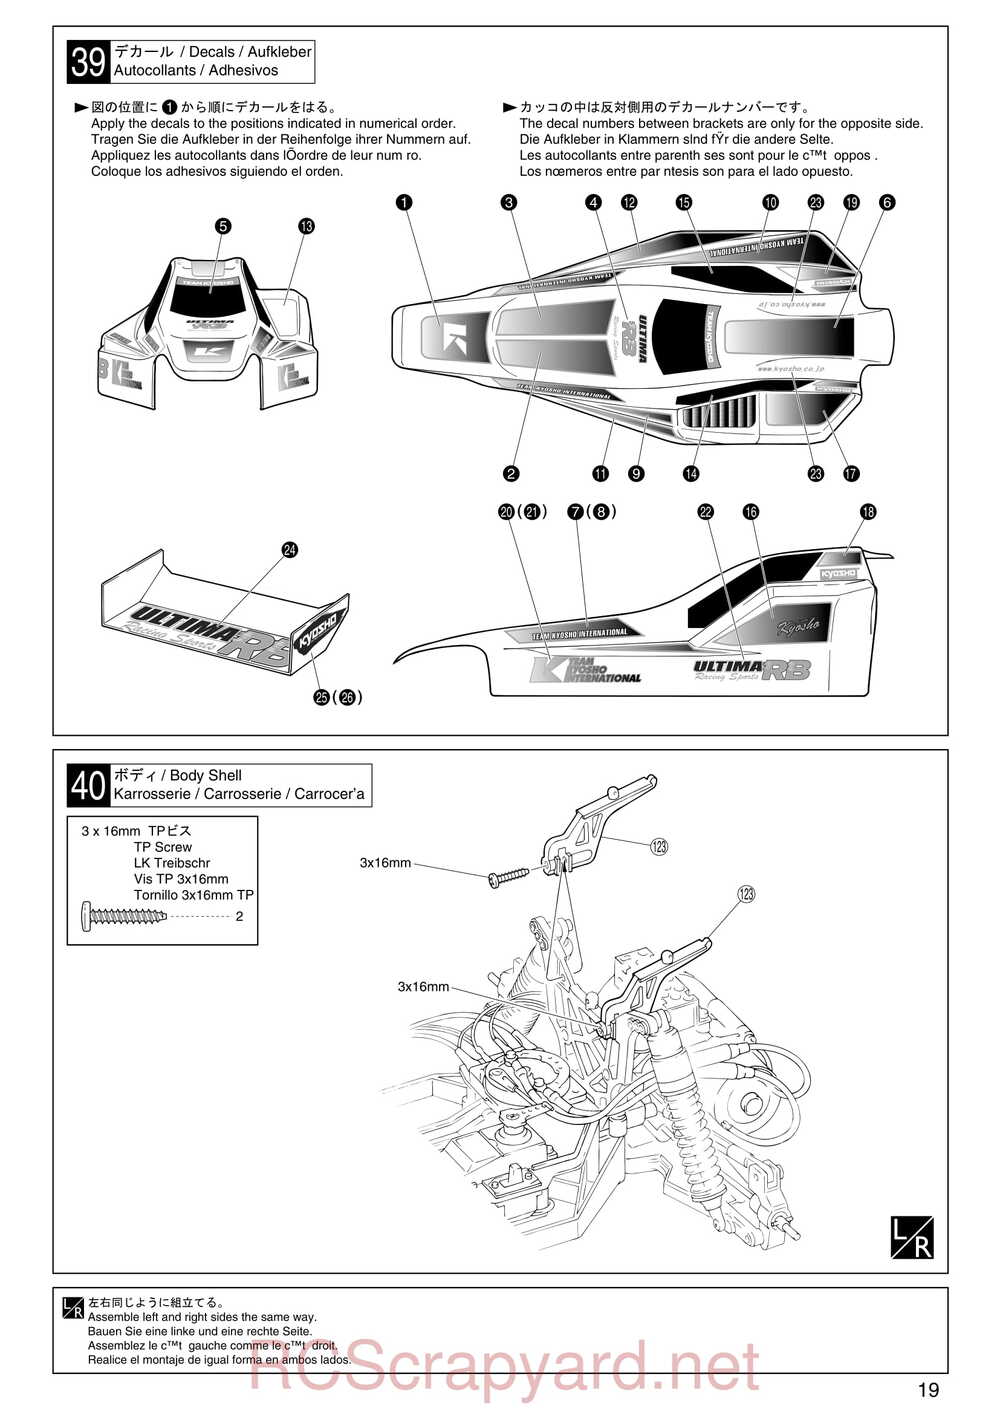 Kyosho - 30072 - EP-Ultima-RB-Racing-Sports - Manual - Page 19